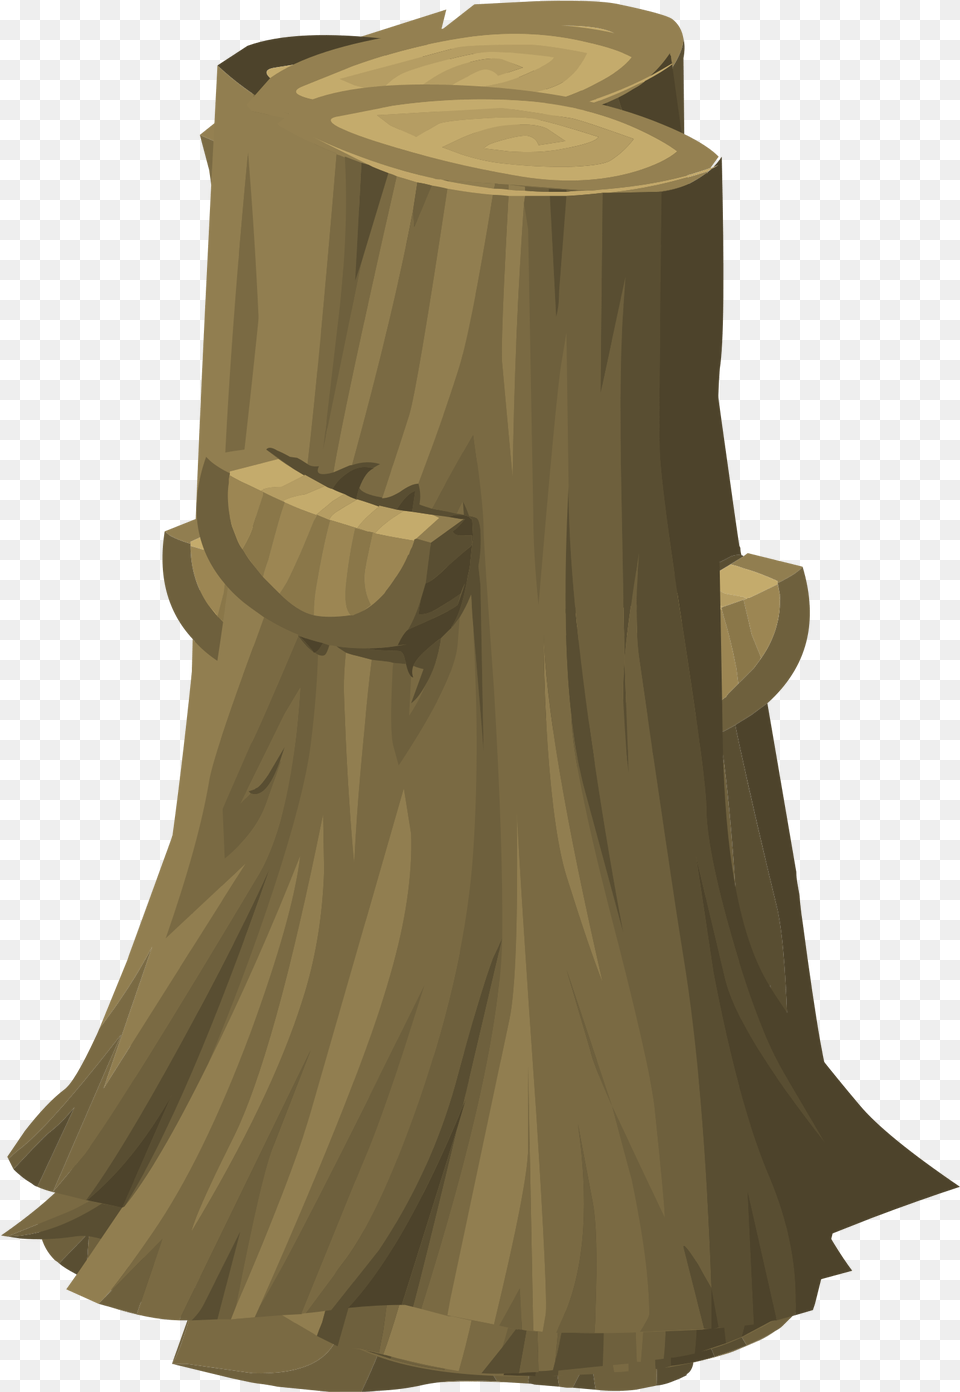 Harvestable Resources Wood Tree Clip Arts Cut Tree, Plant, Tree Stump, Person Png Image